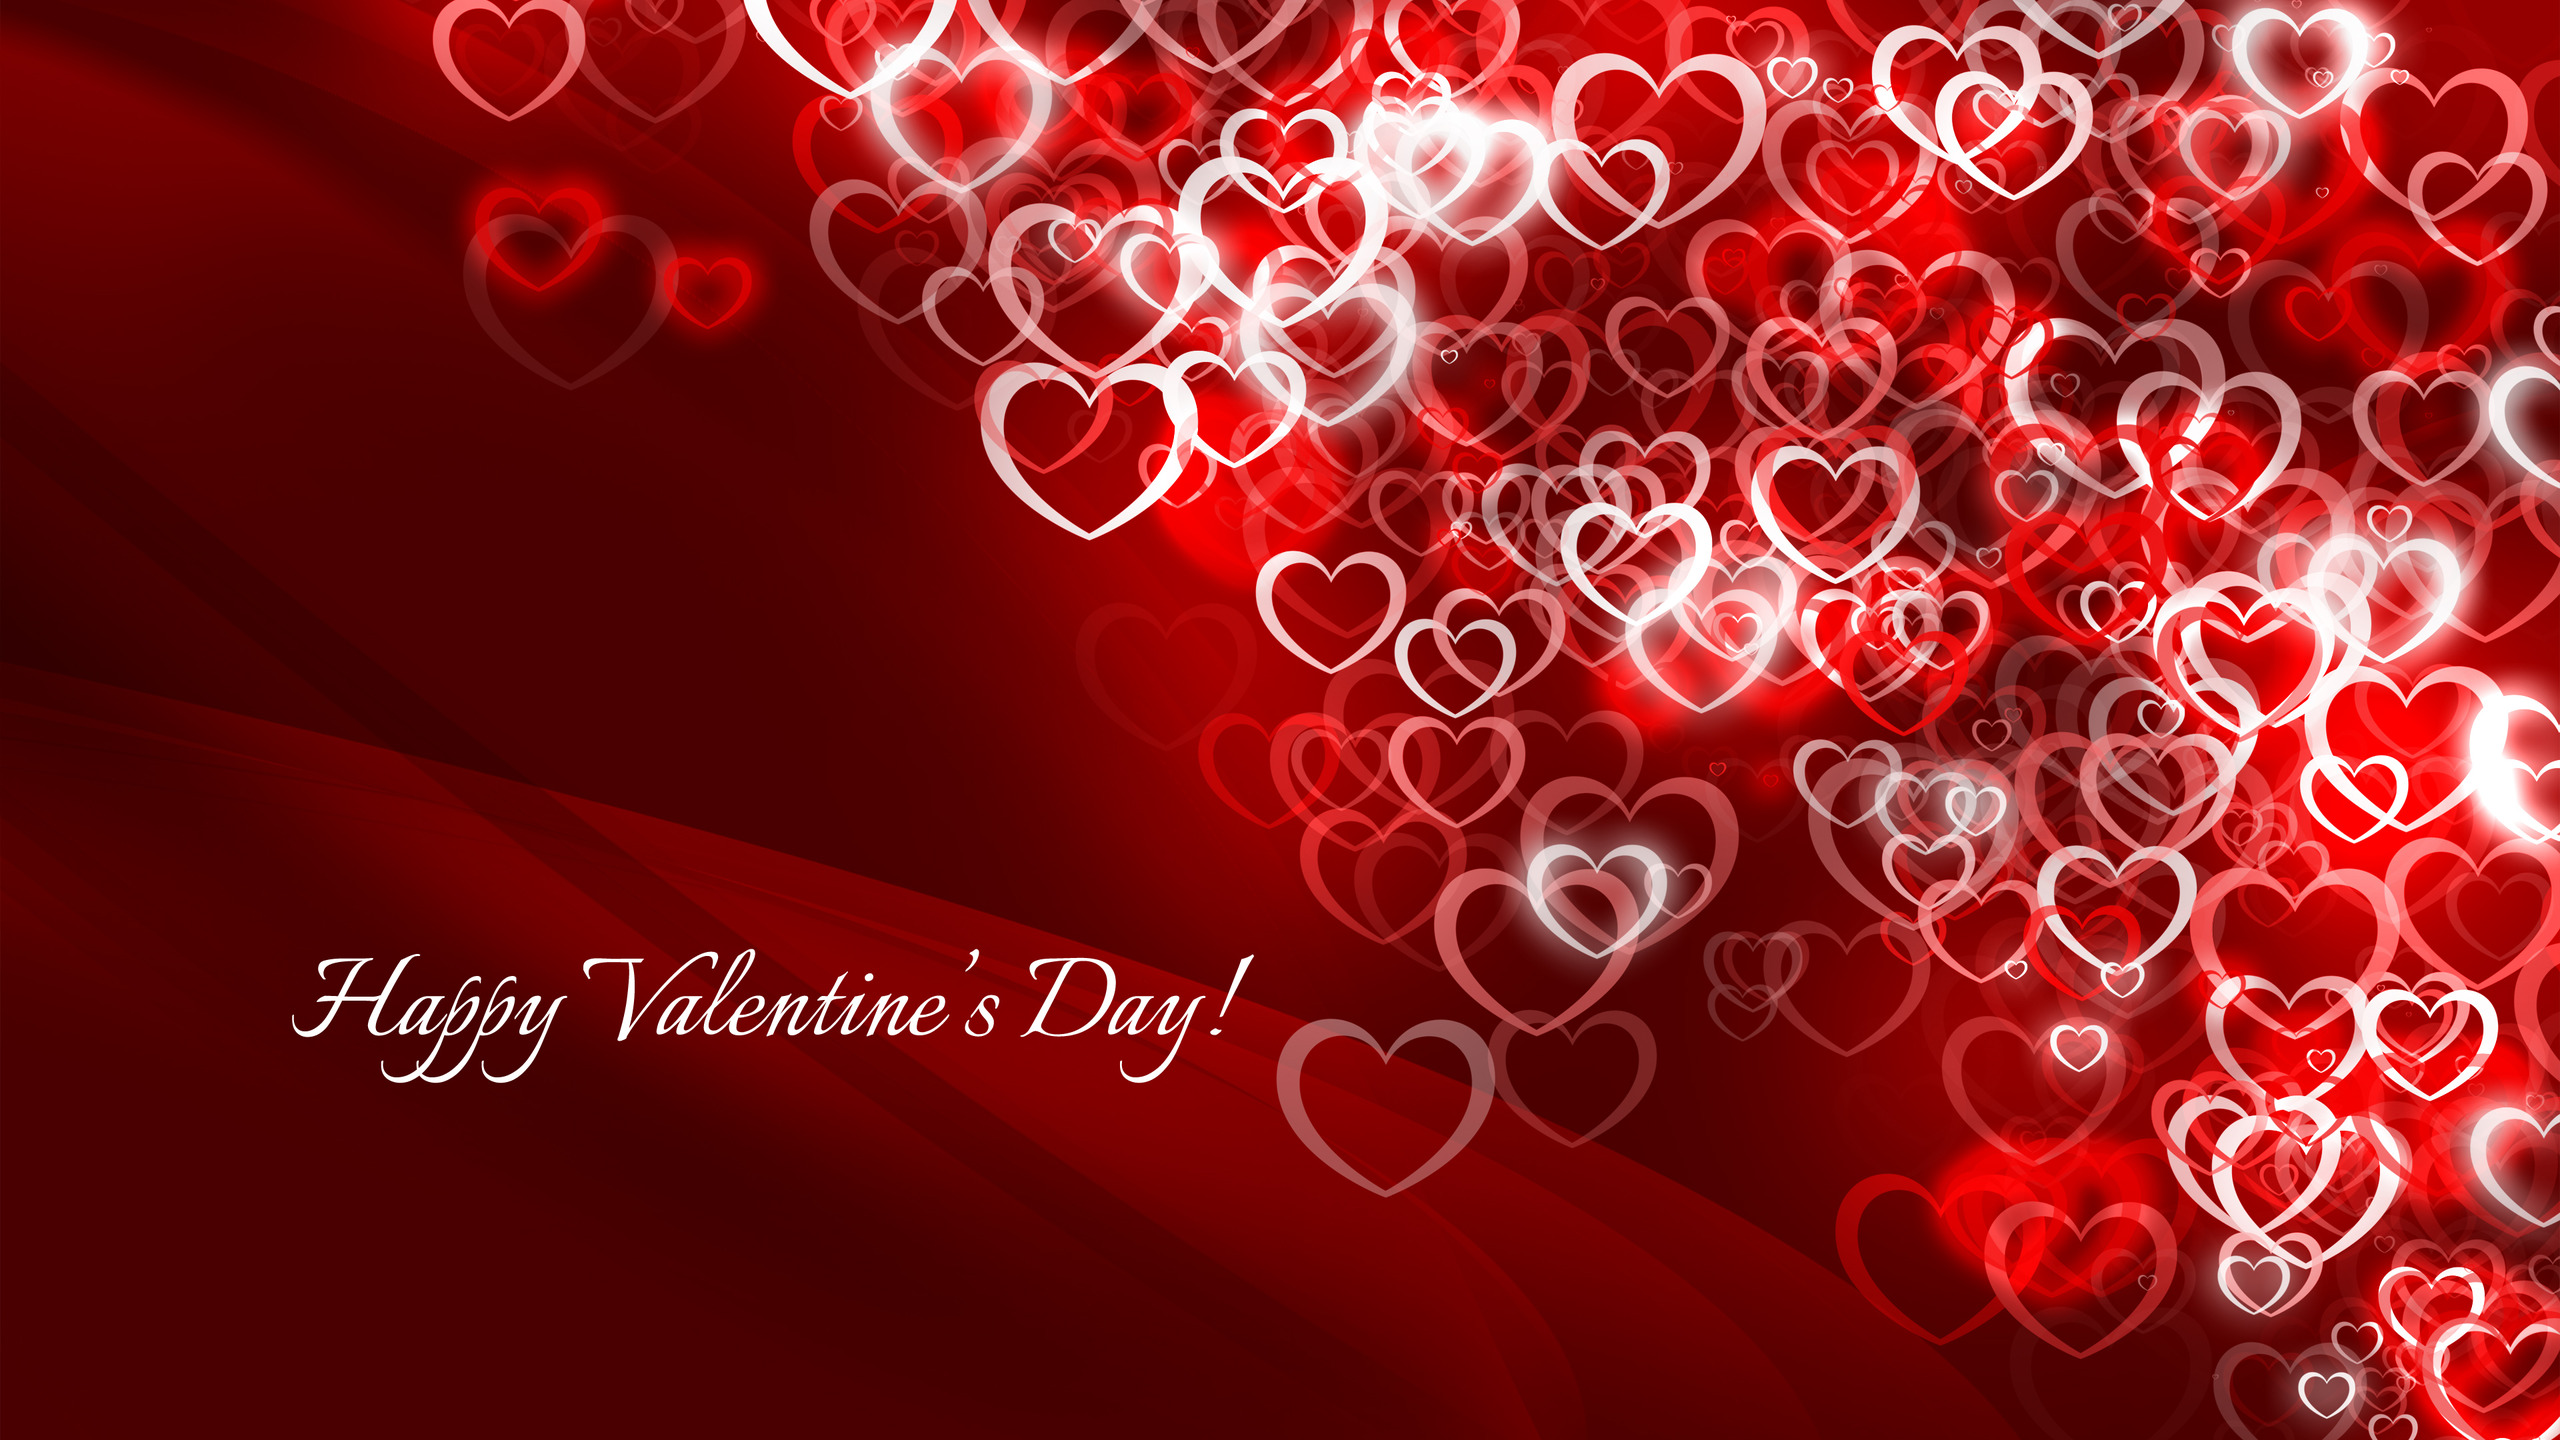 Valentines-day-latest-hd-wallpapers-1.jpg